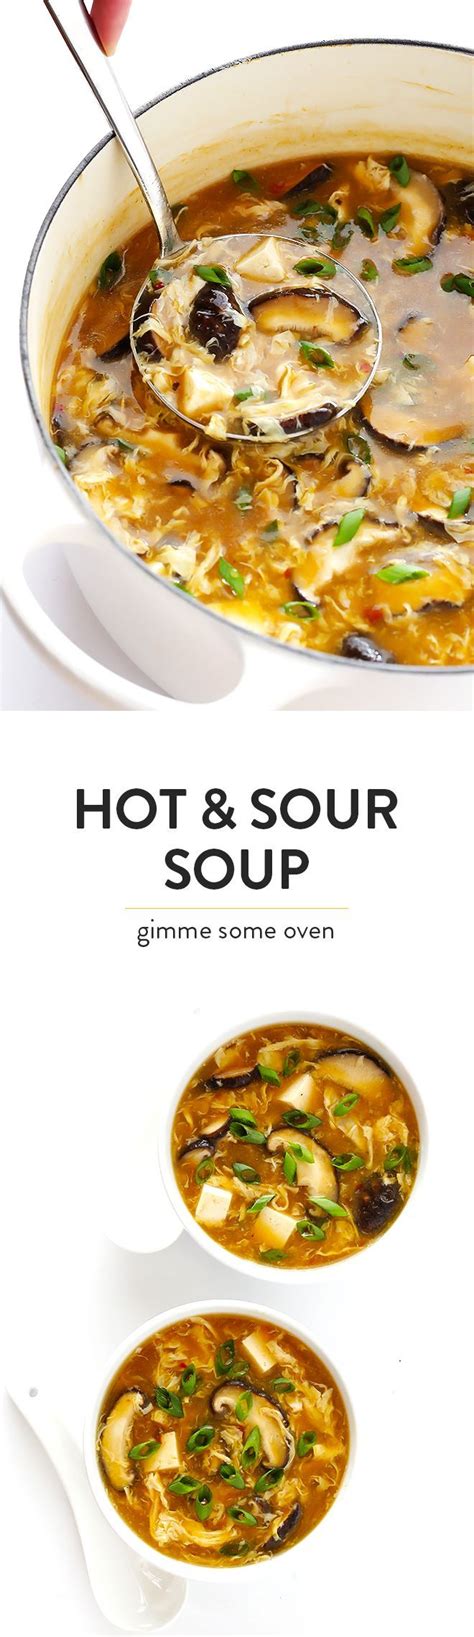 Reminds me of the soup that my parents used to make at our restaurant. +Yummy Call Hot And Sour Soup Recipie - Hot And Sour Soup ...